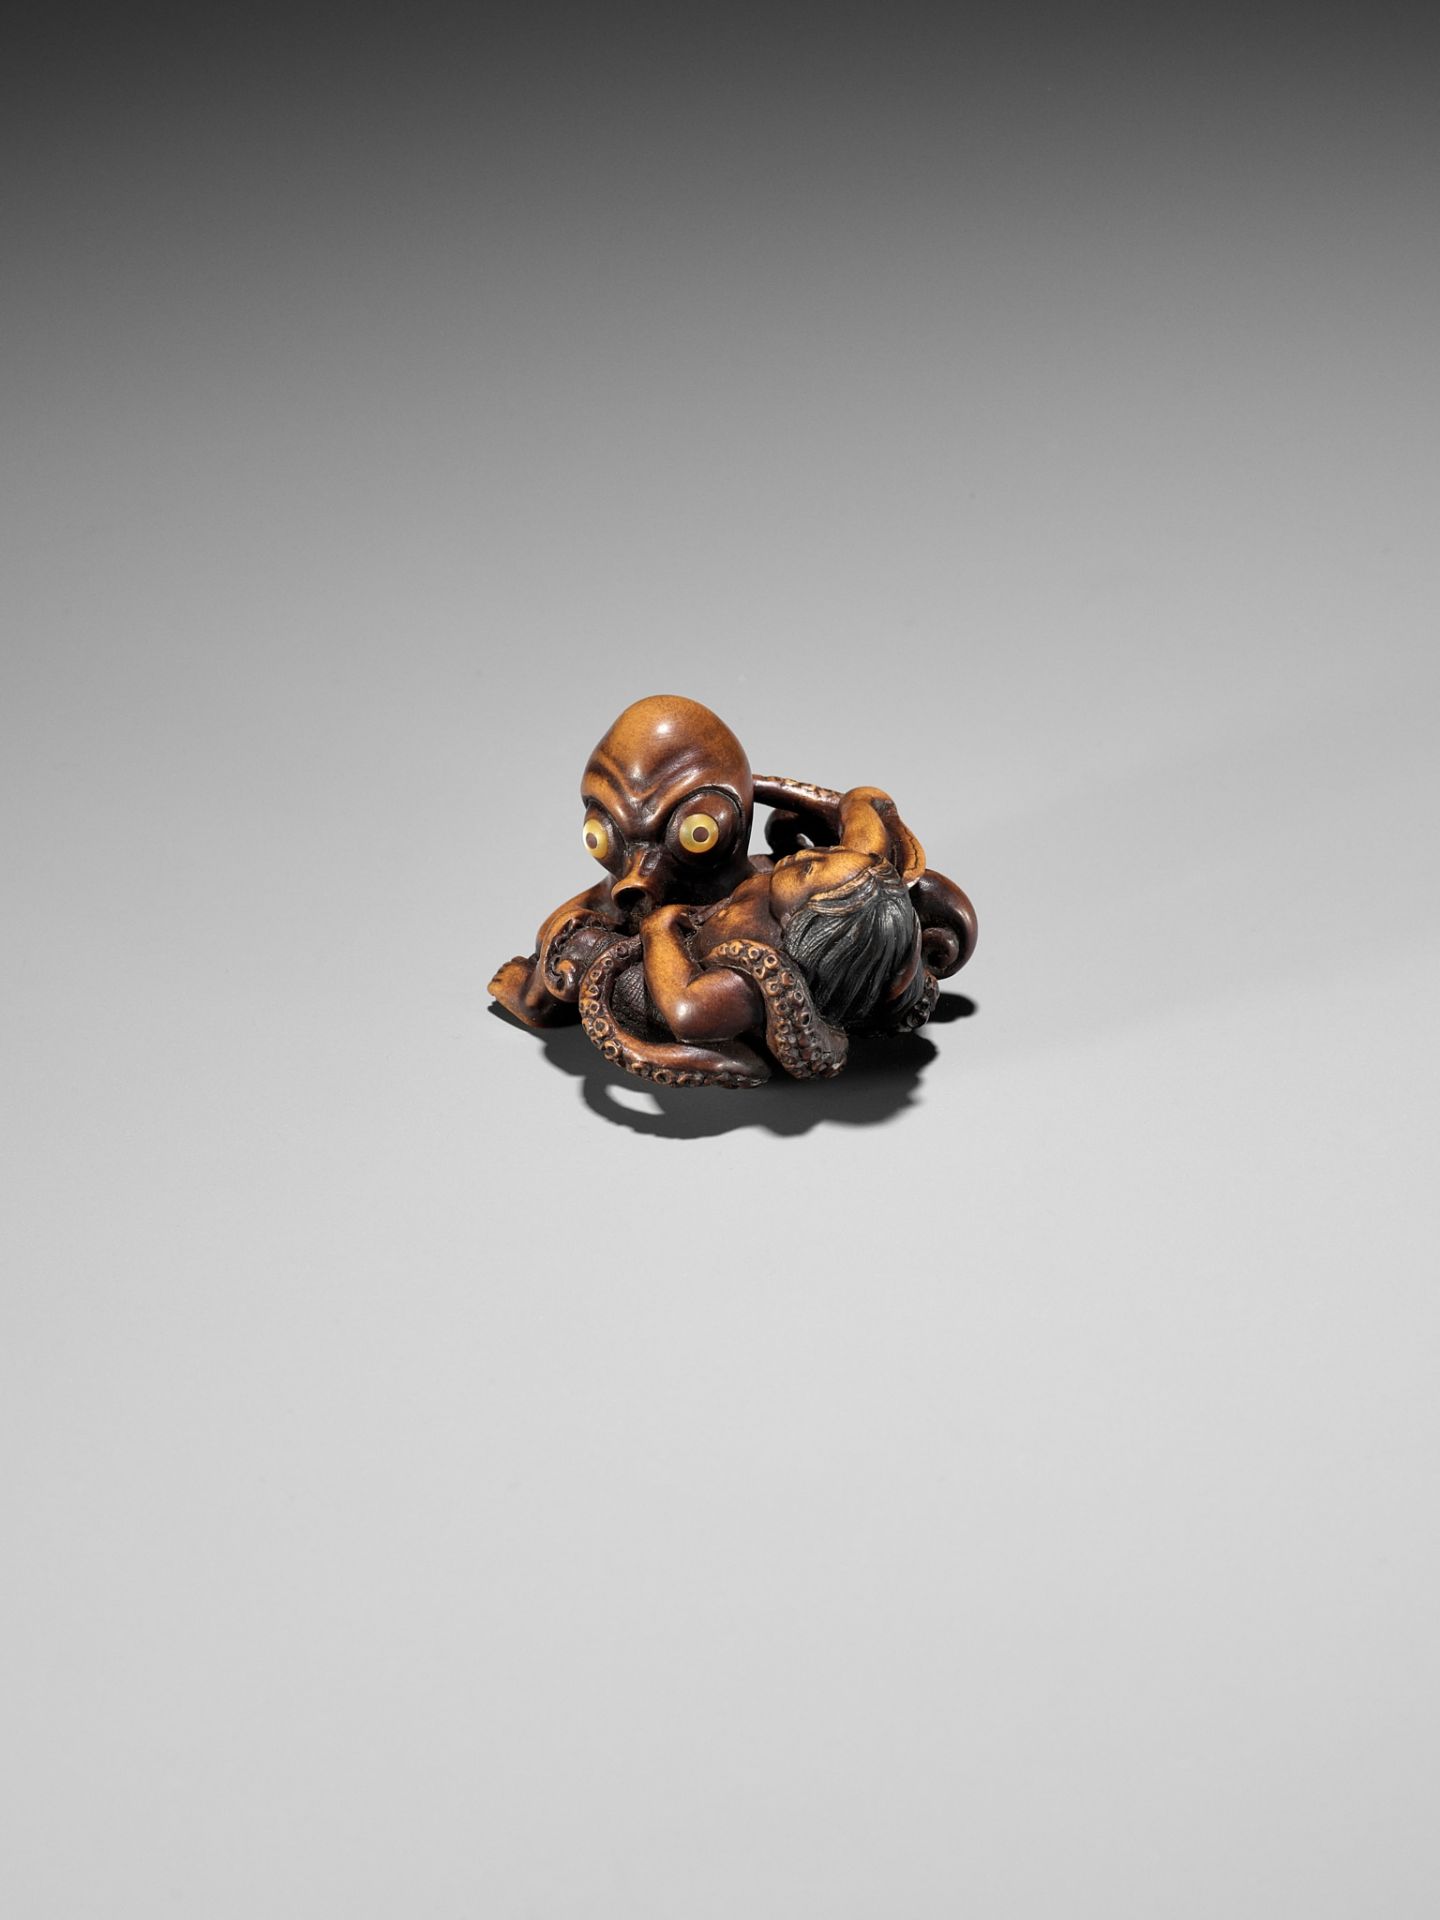 A SUPERB WOOD NETSUKE OF AN AMA STRUGGLING WITH AN OCTOPUS, ATTRIBUTED TO IKKYU - Image 14 of 16